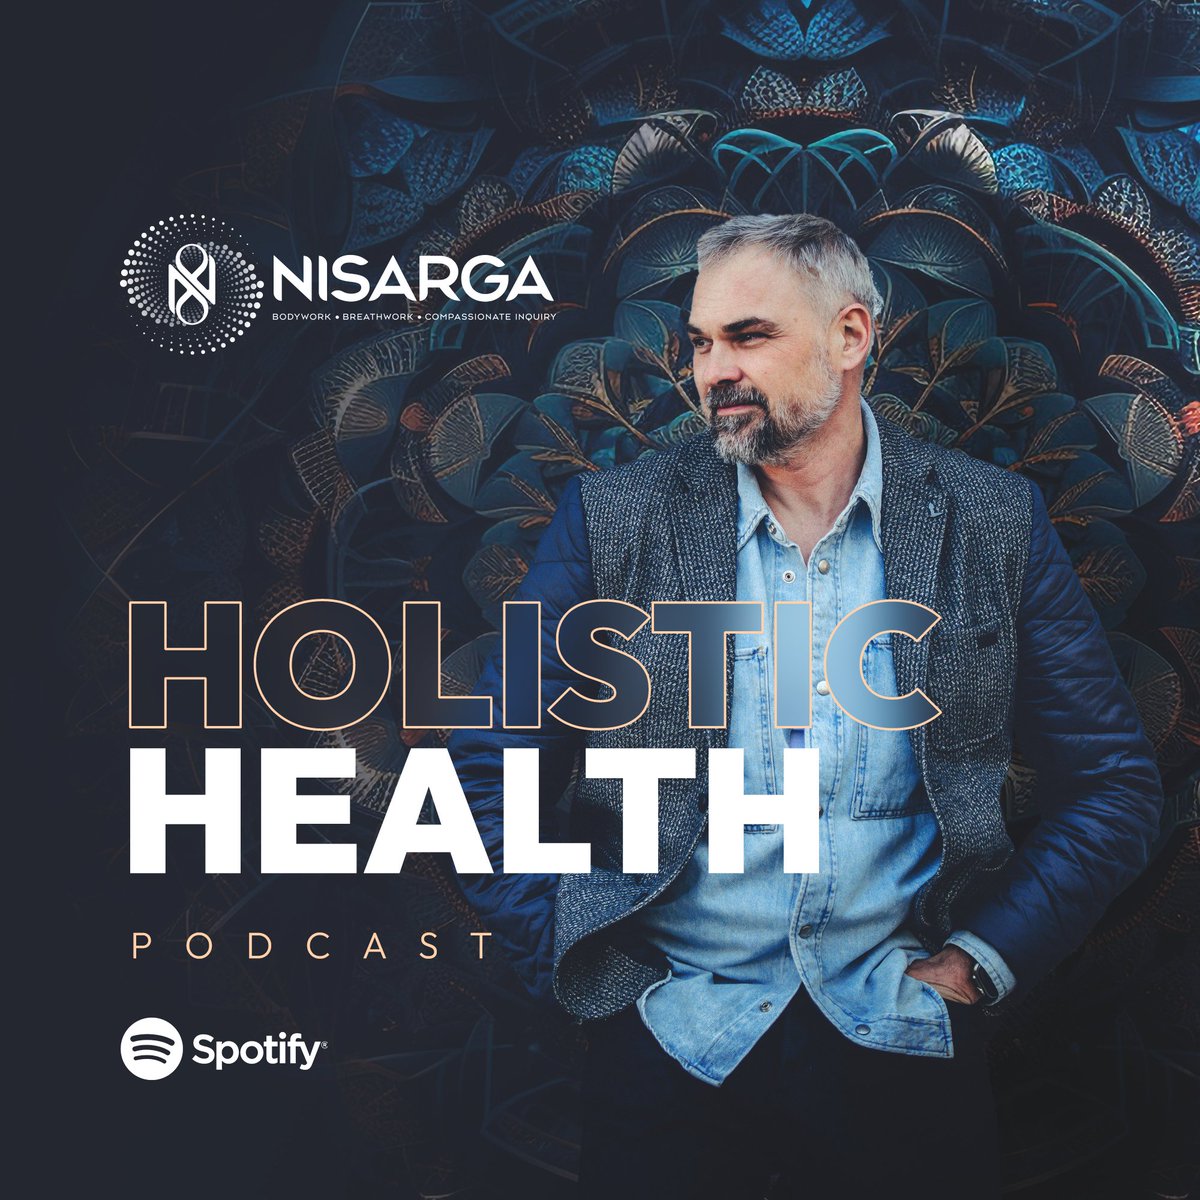 Listen these cool conversations with brilliant teachers renowned in their fields from around the globe, as we explore meditation, emotions, diet and more.
Follow the link: open.spotify.com/show/4lR779uey…

#PodcastWisdom #Healthy #InspirationDaily #WellnessCommunity #TransformativeTalks